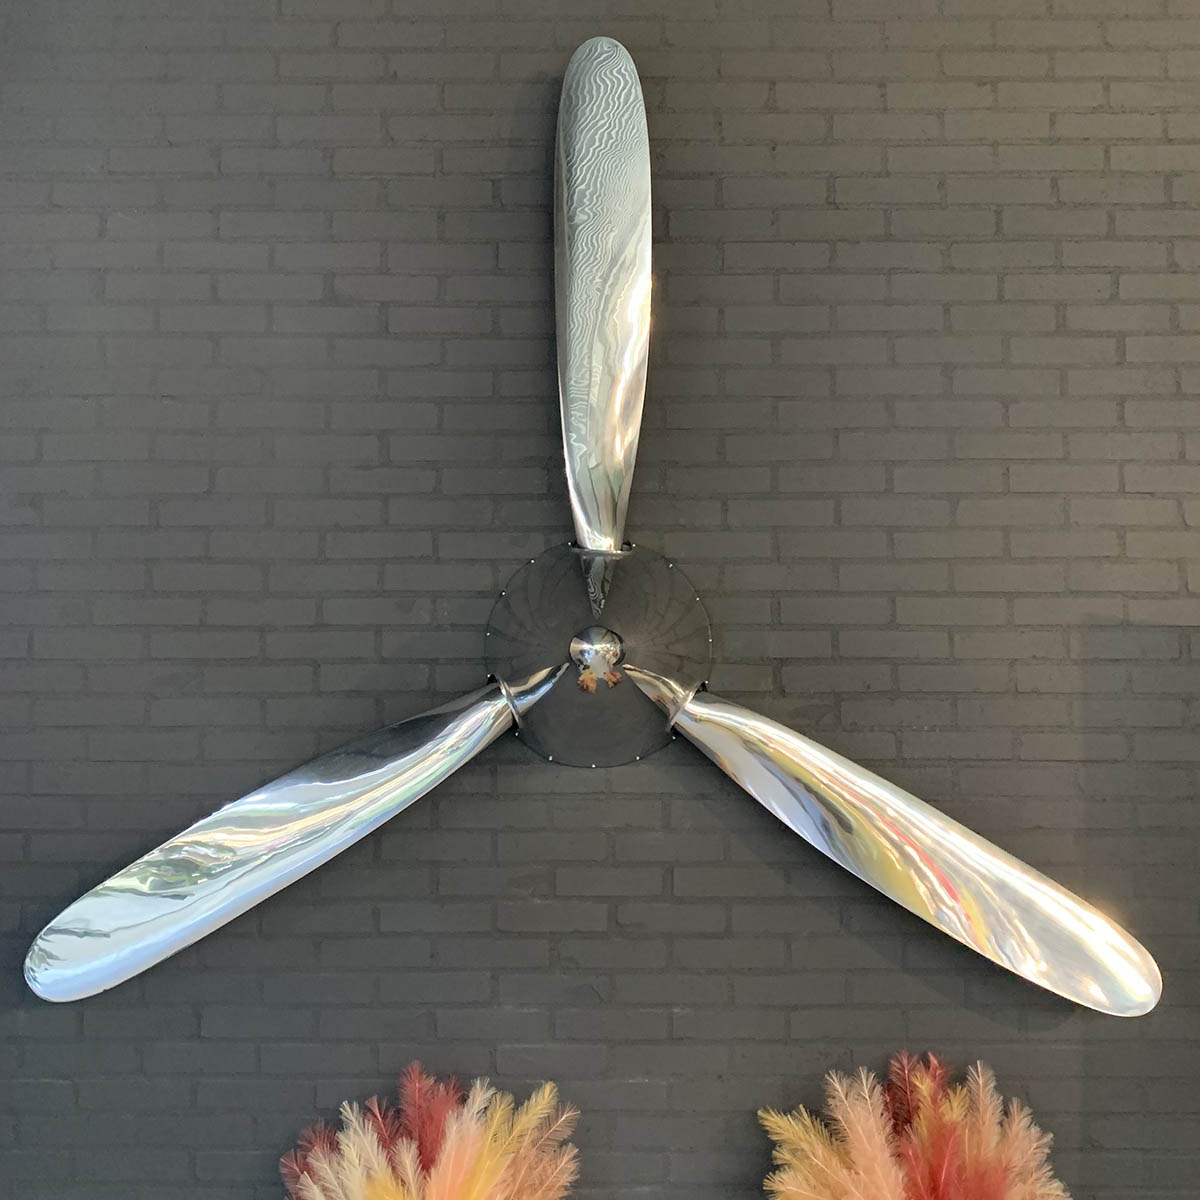 Polished Hartzell propellers and hub hanging on a brick wall in Kaeve.